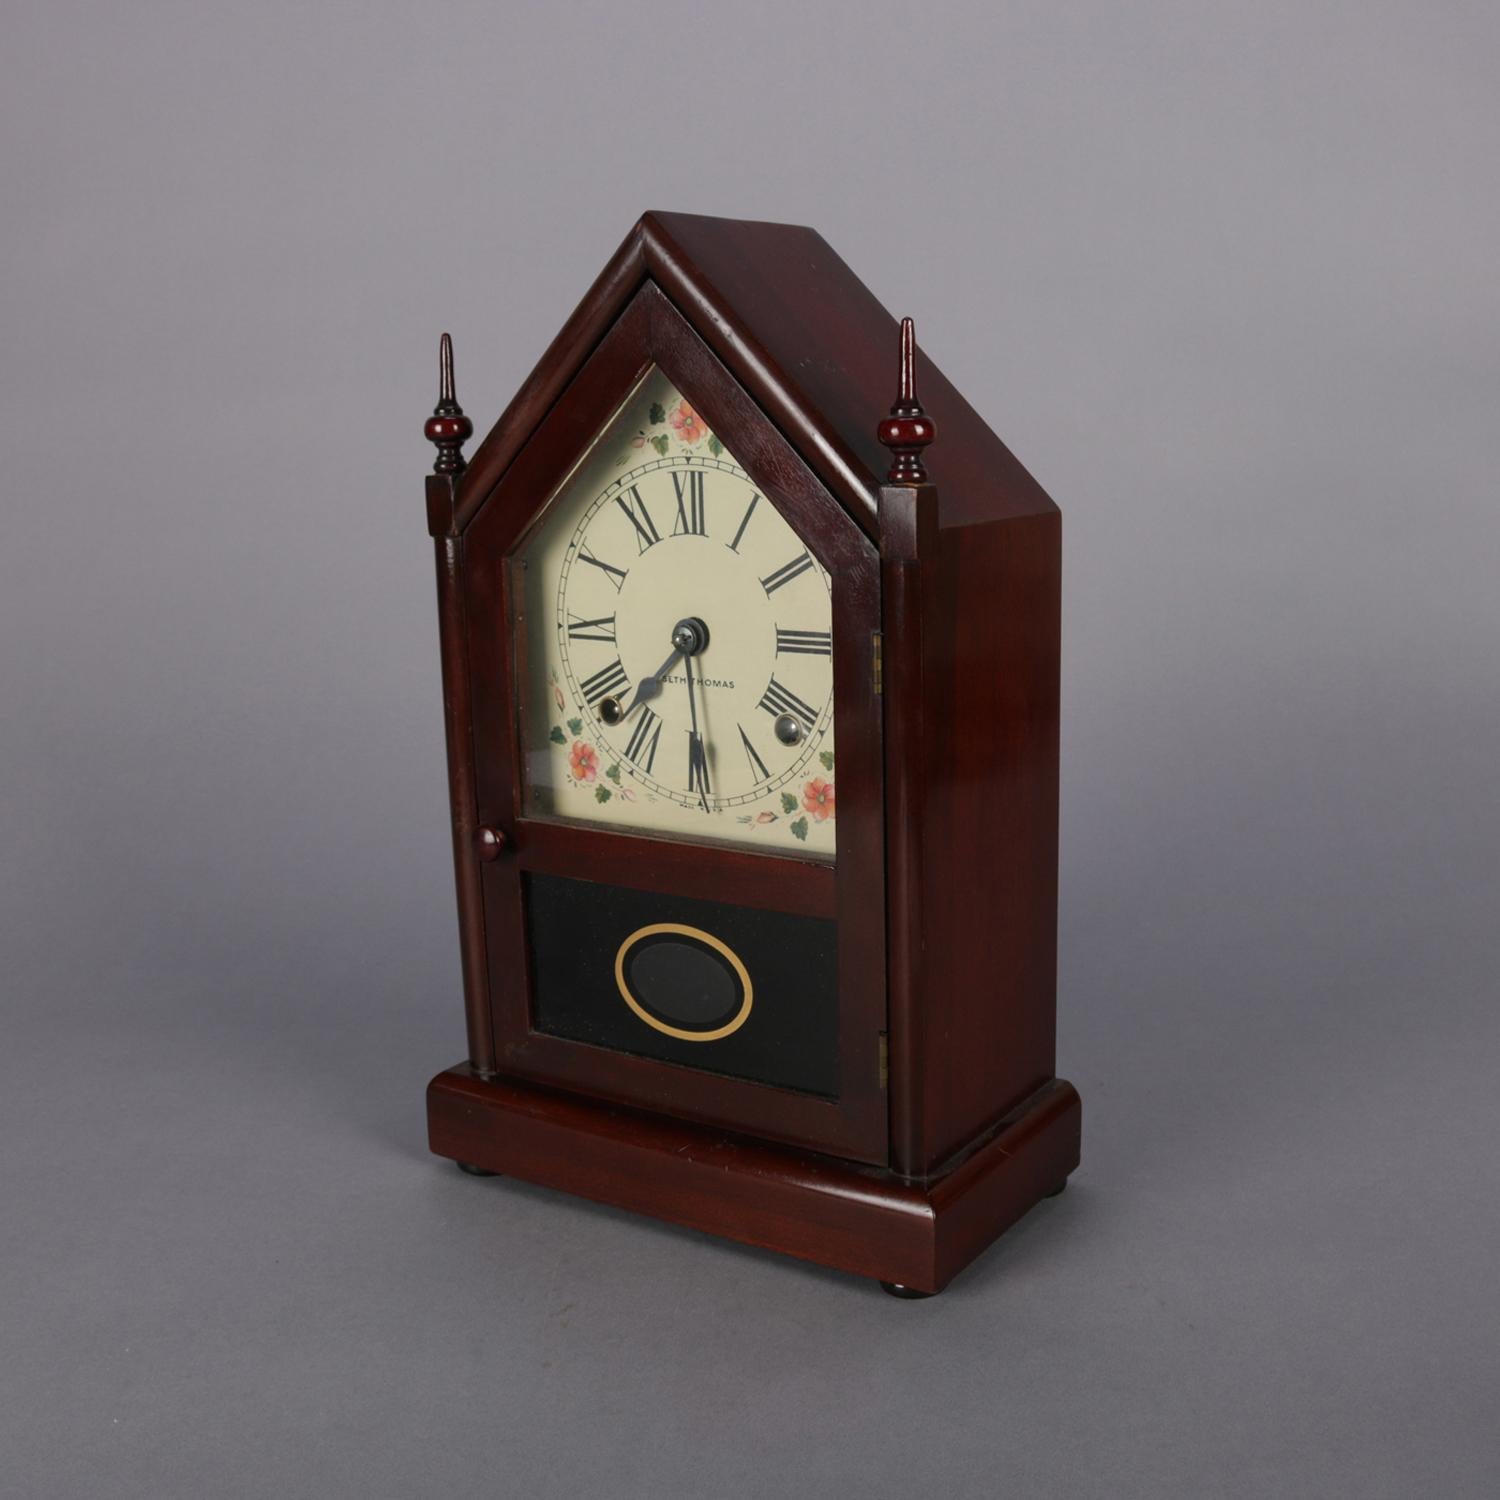 Antique steeple mantel clock by Seth Thomas features mahogany case, hand painted face with Roman numerals with intermittent floral spray and signed Seth Thomas, working and with key chiming on hour and half hour, 20th century

Measures: 14.75